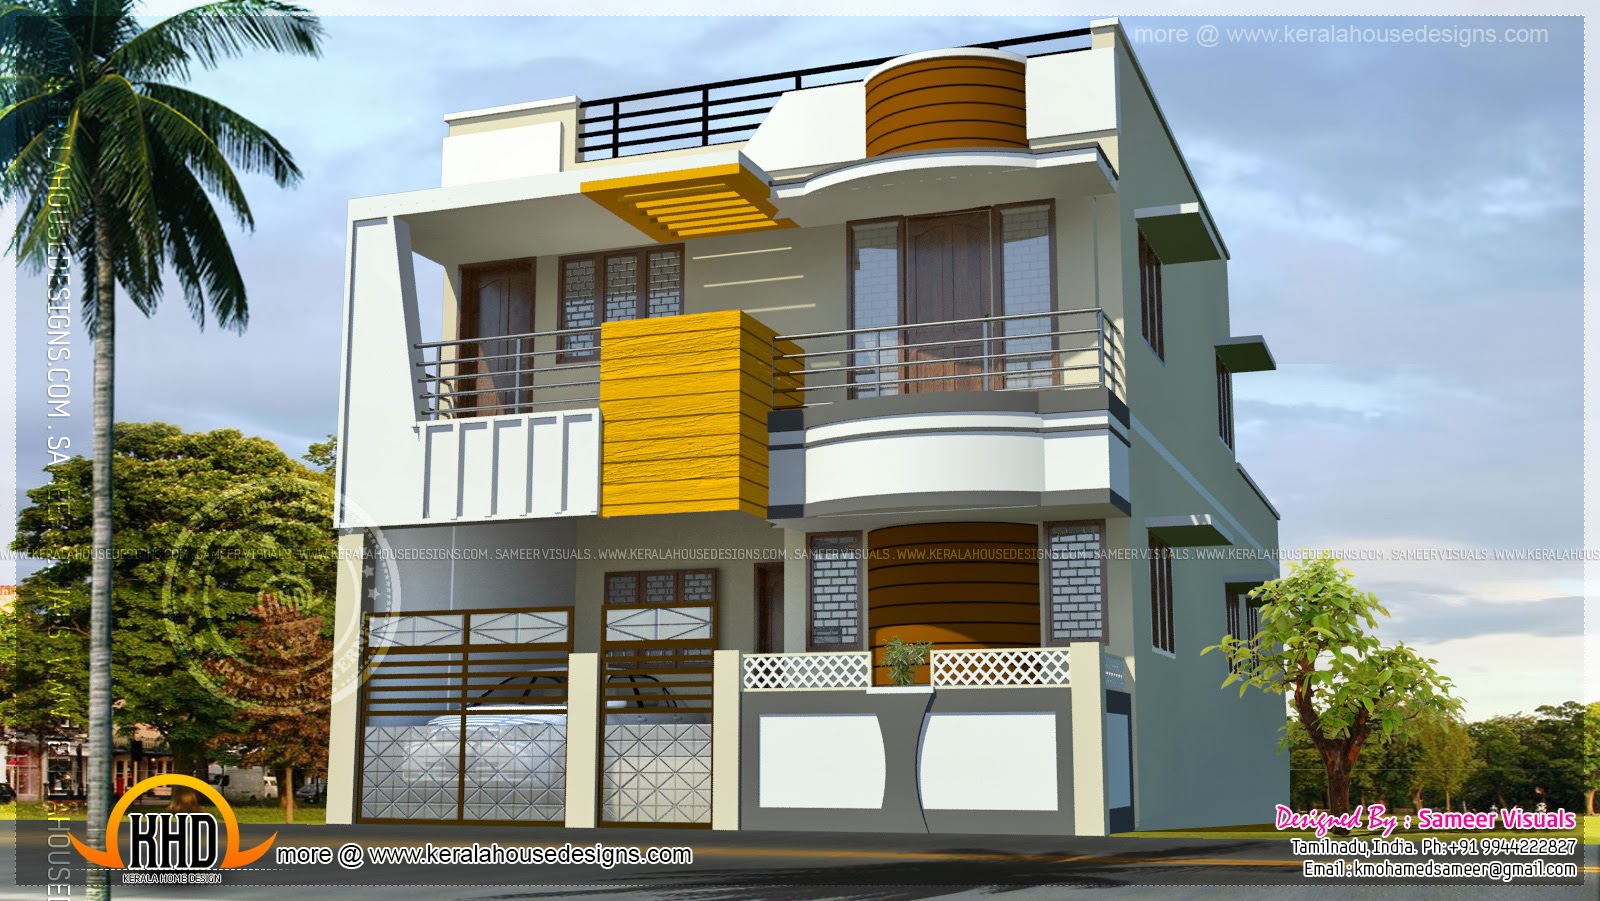 Double storied modern south Indian home  Kerala home design and floor plans